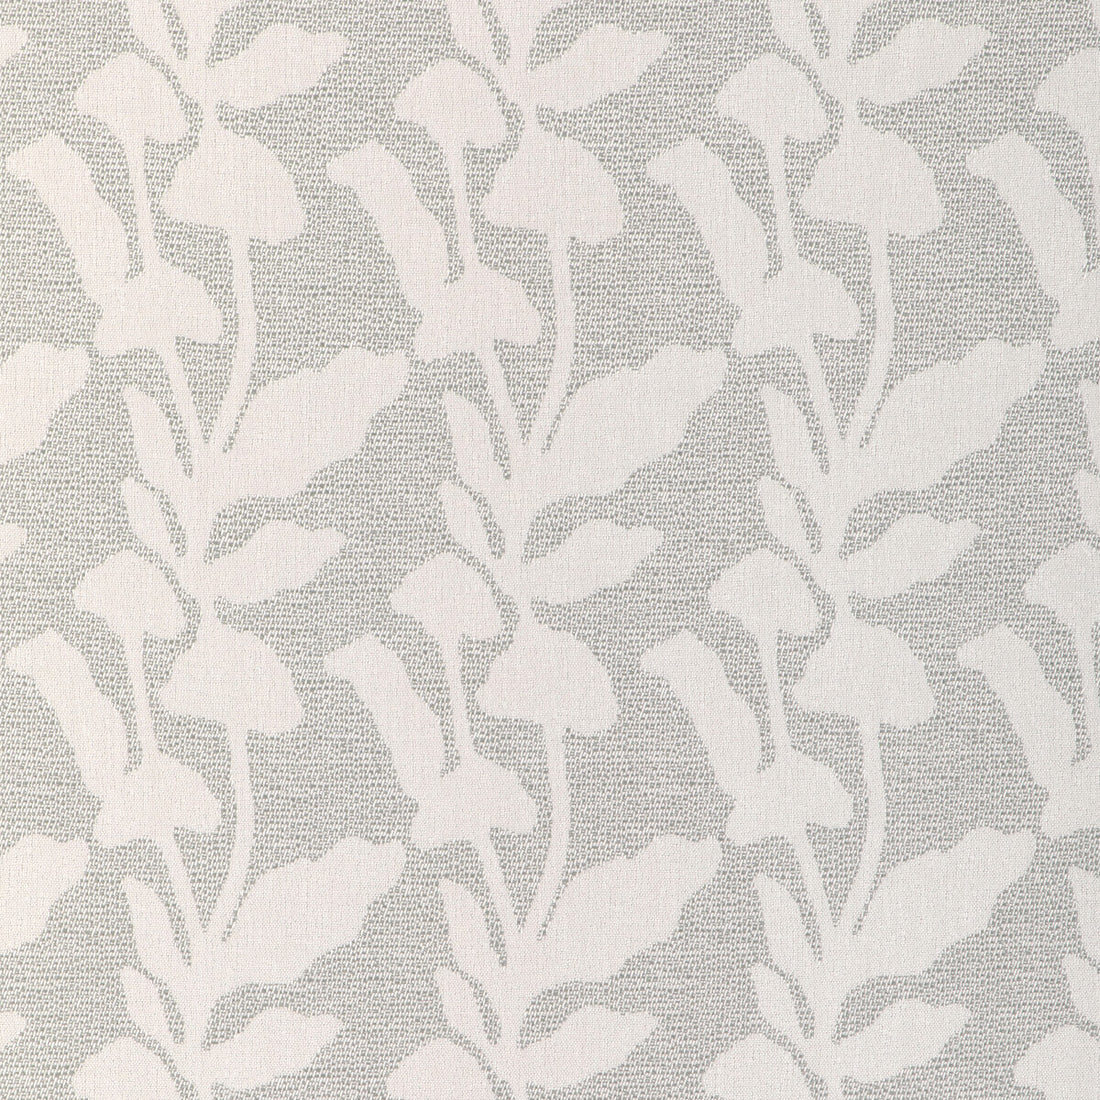 Rose Cliff fabric in driftwood color - pattern 36937.11.0 - by Kravet Couture in the Riviera collection